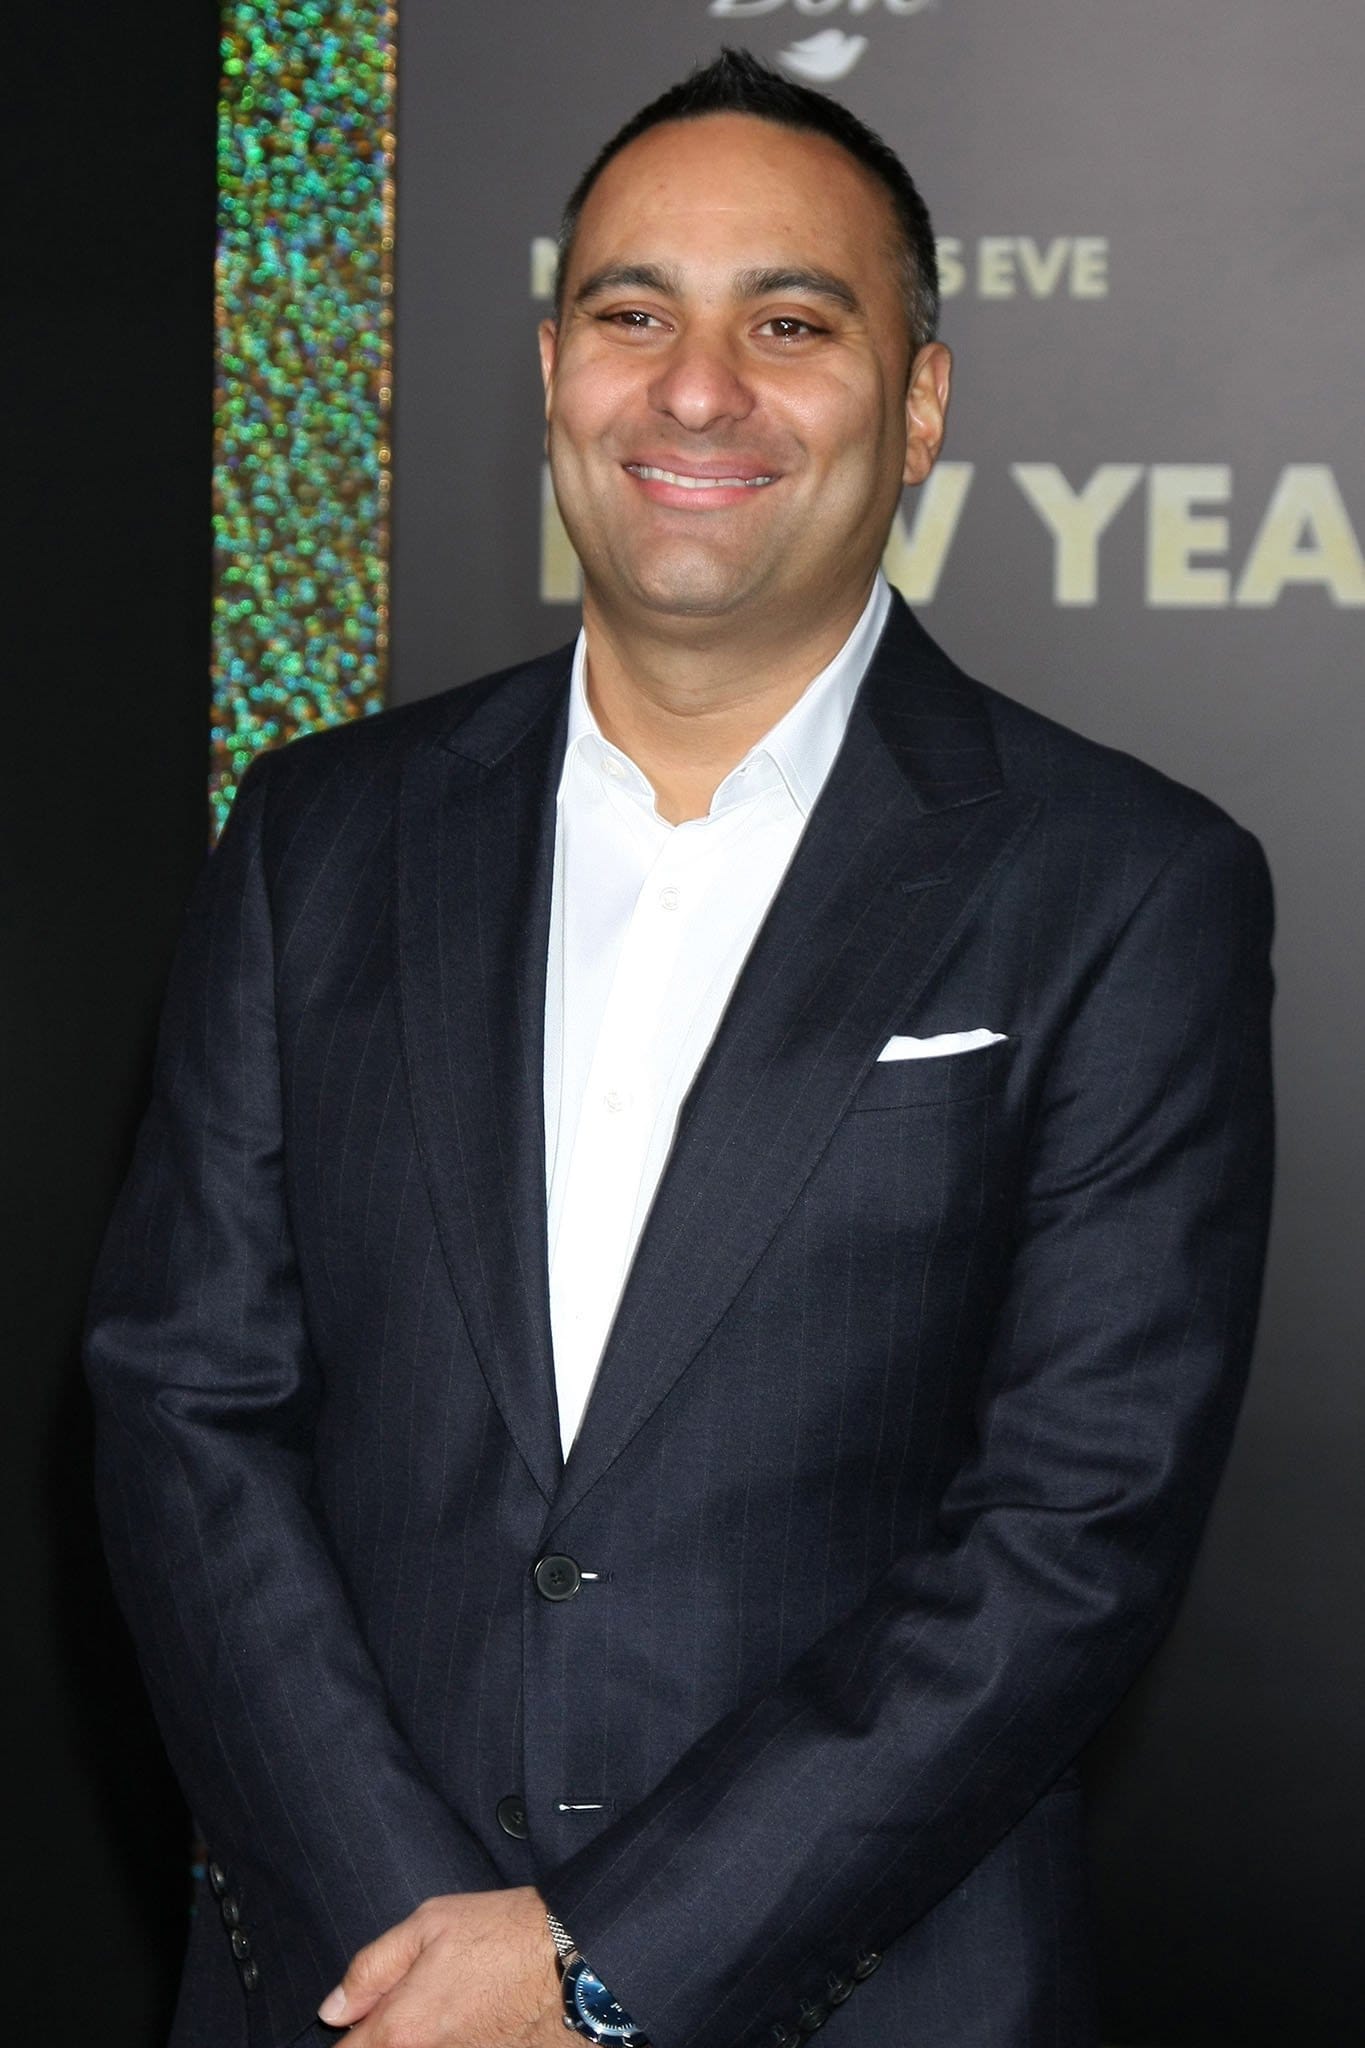 Russell Peters was third on Forbes’ list of the world’s highest-paid comedians in 2013 and became the first comedian to get a Netflix stand-up special